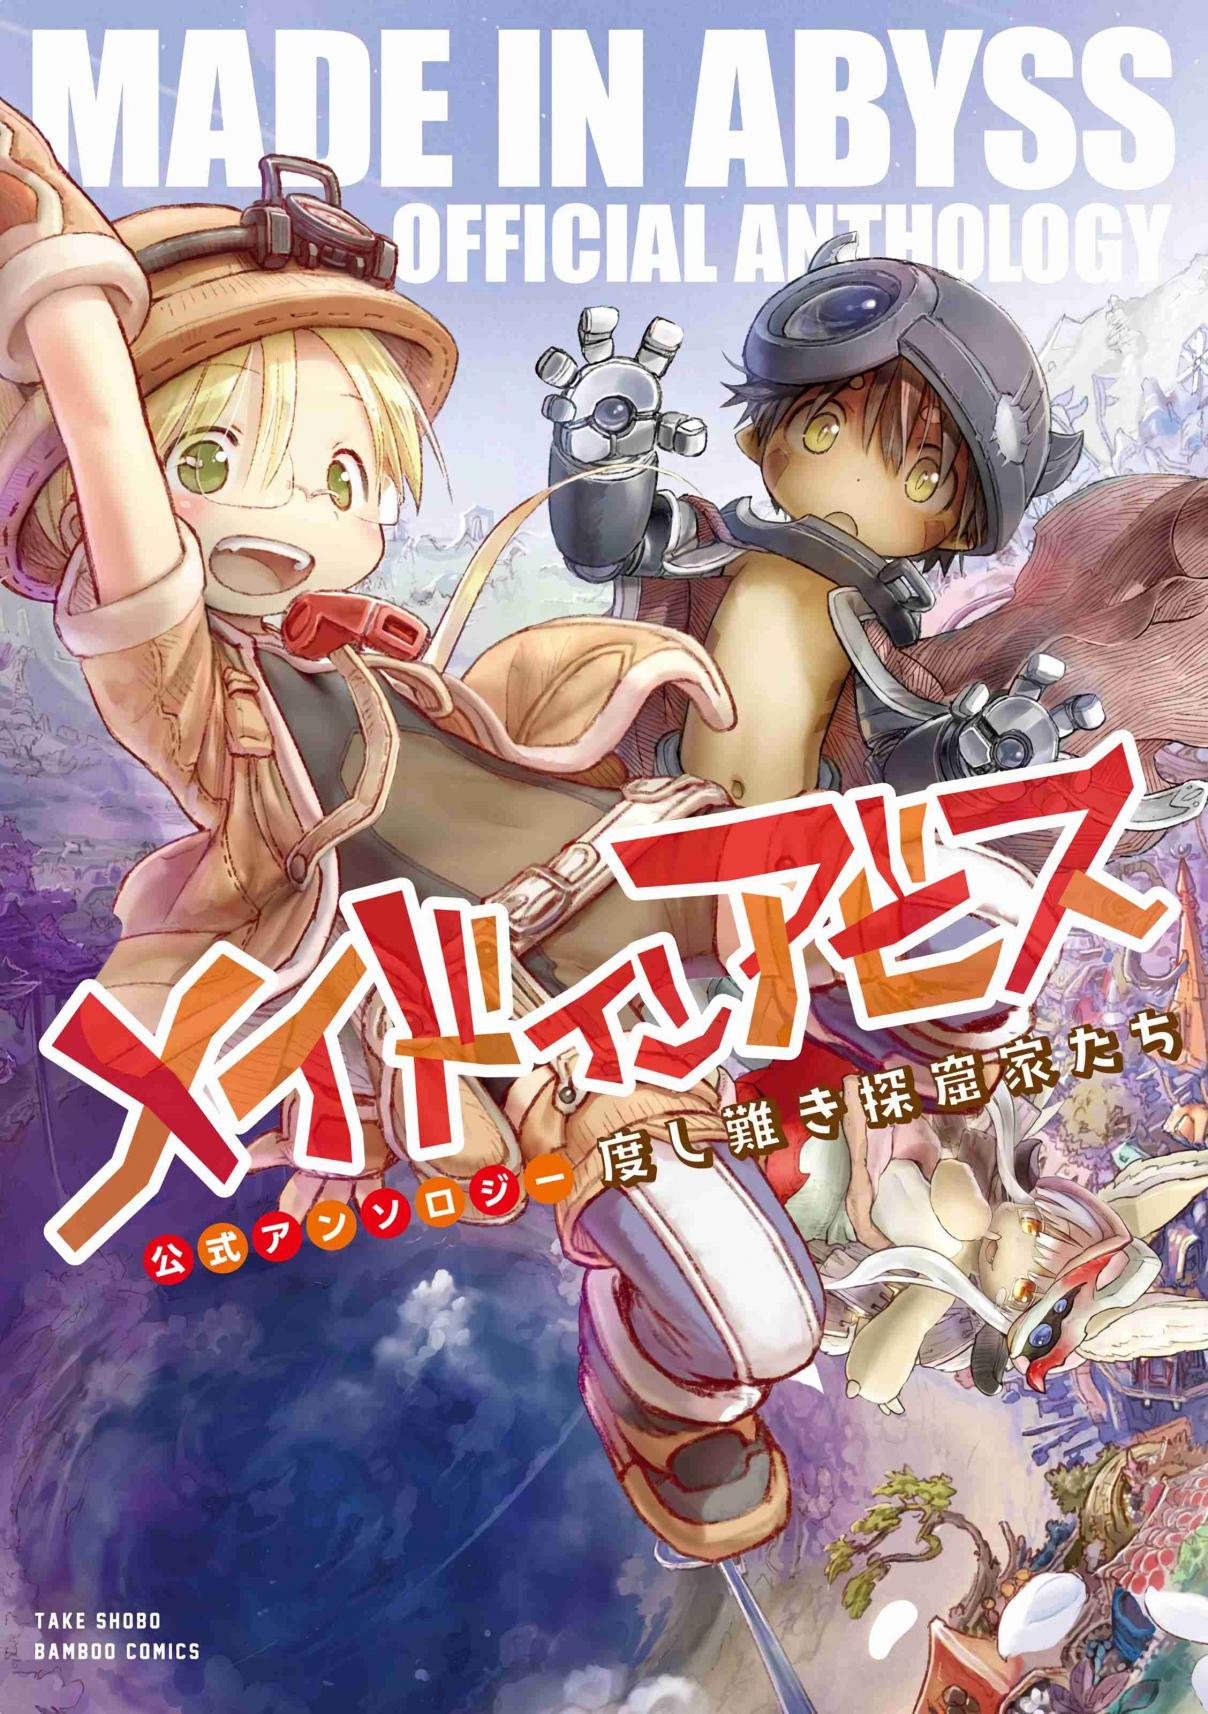 Made in Abyss Official Anthology Vol. 1 Ch. 16 Volume 1 Extras